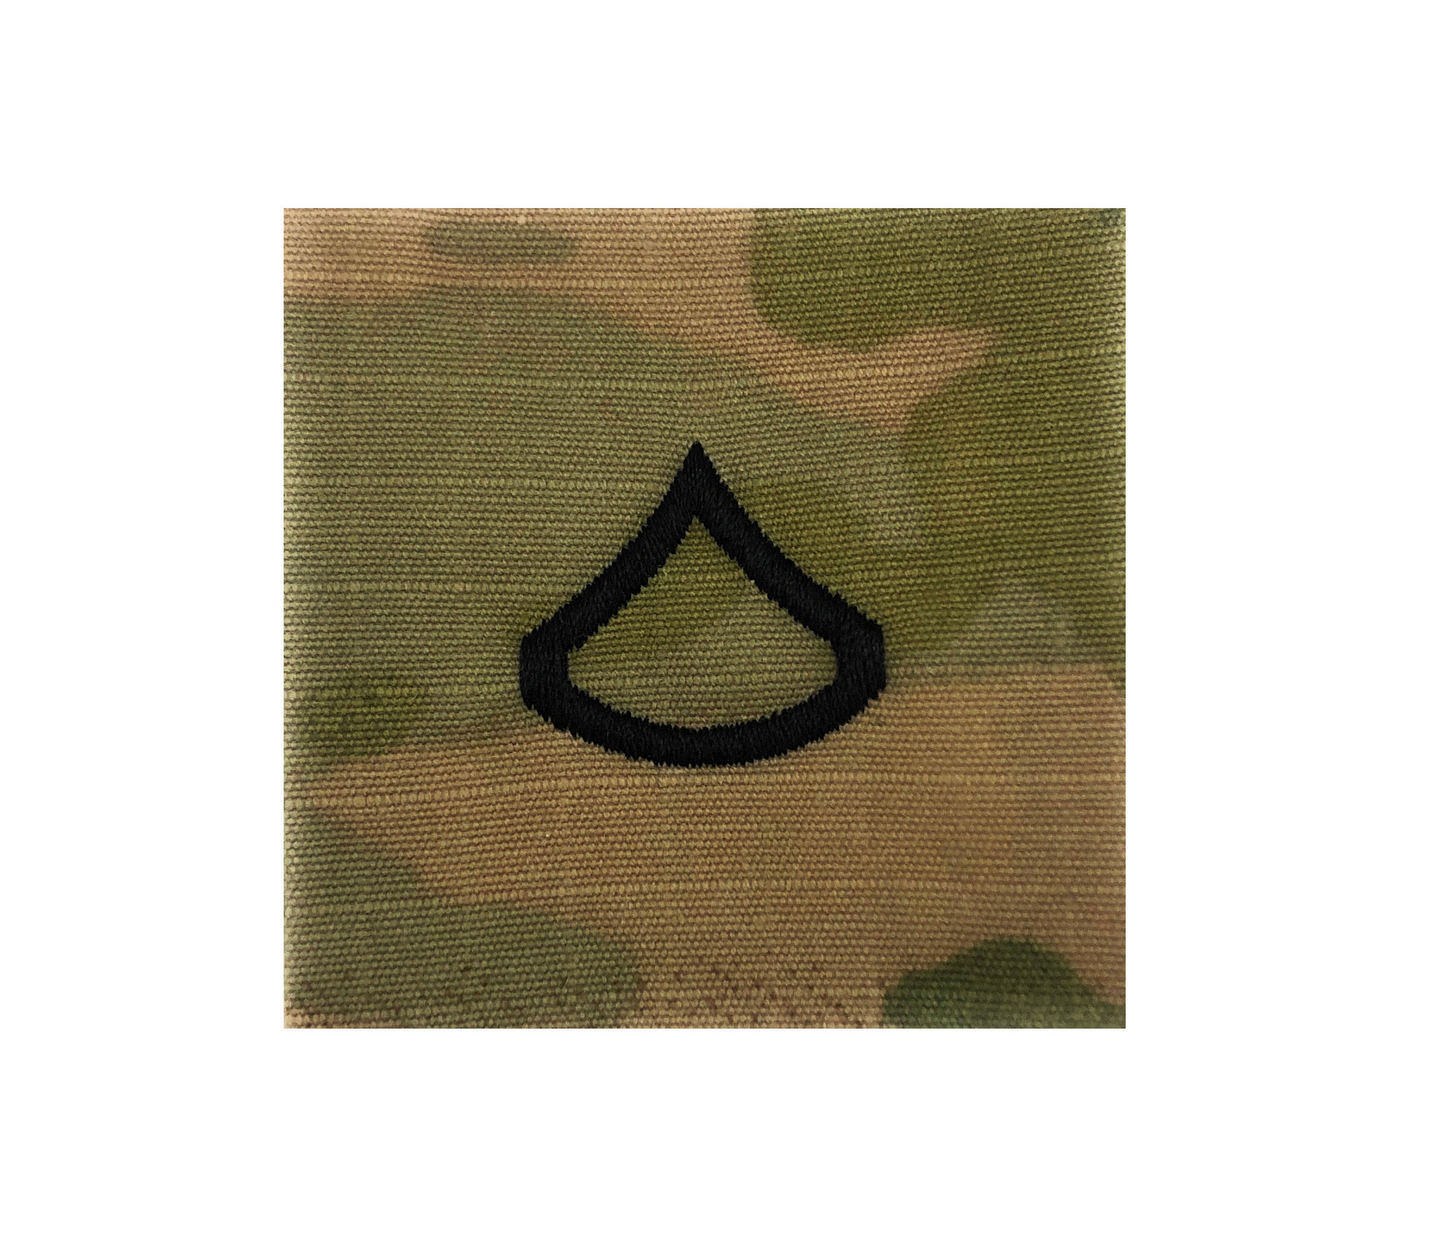 U.S. Army E3 Private First Class OCP 2x2 Sew-On Rank (For Shirt, Jacket, Coat) (each)